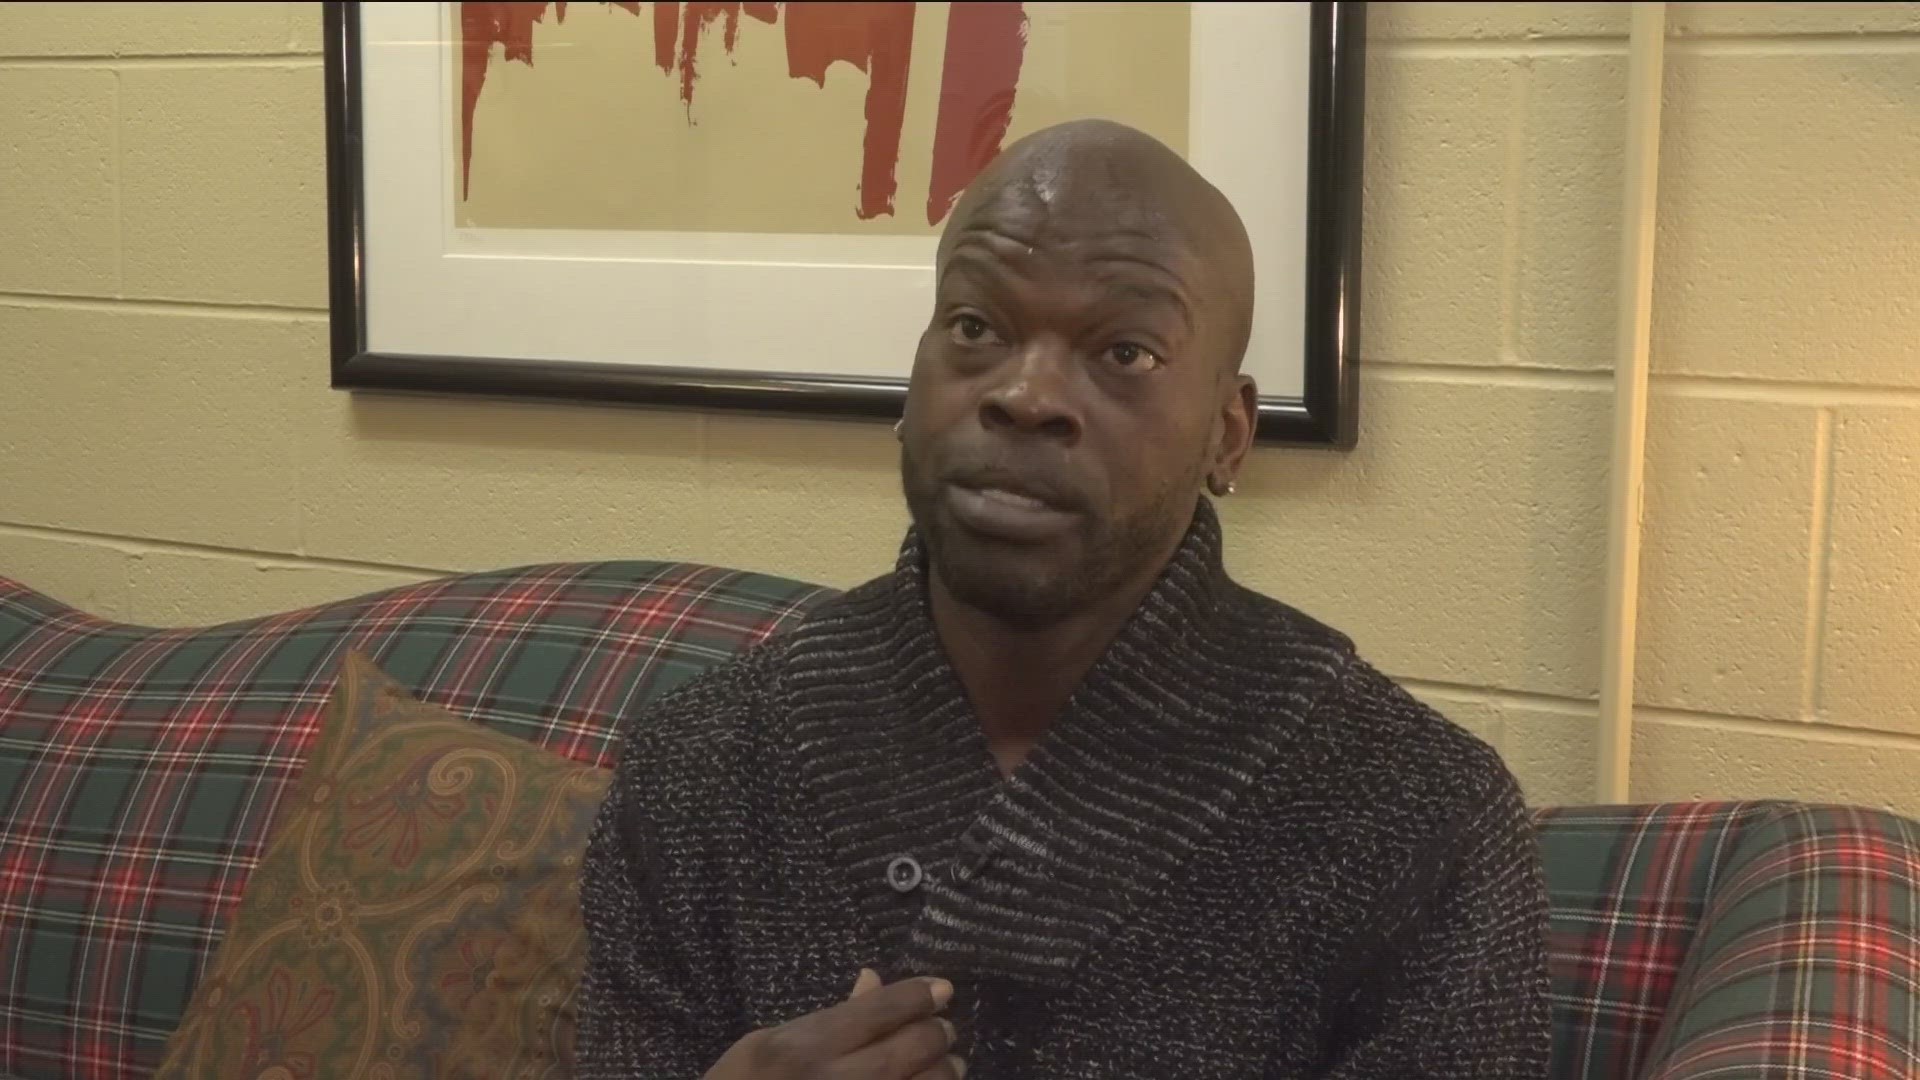 Bradley Higgs, 46, has been homeless and spent time behind bars, but he's turned his life around. Now, he plans to help troubled youths turn their lives around too.